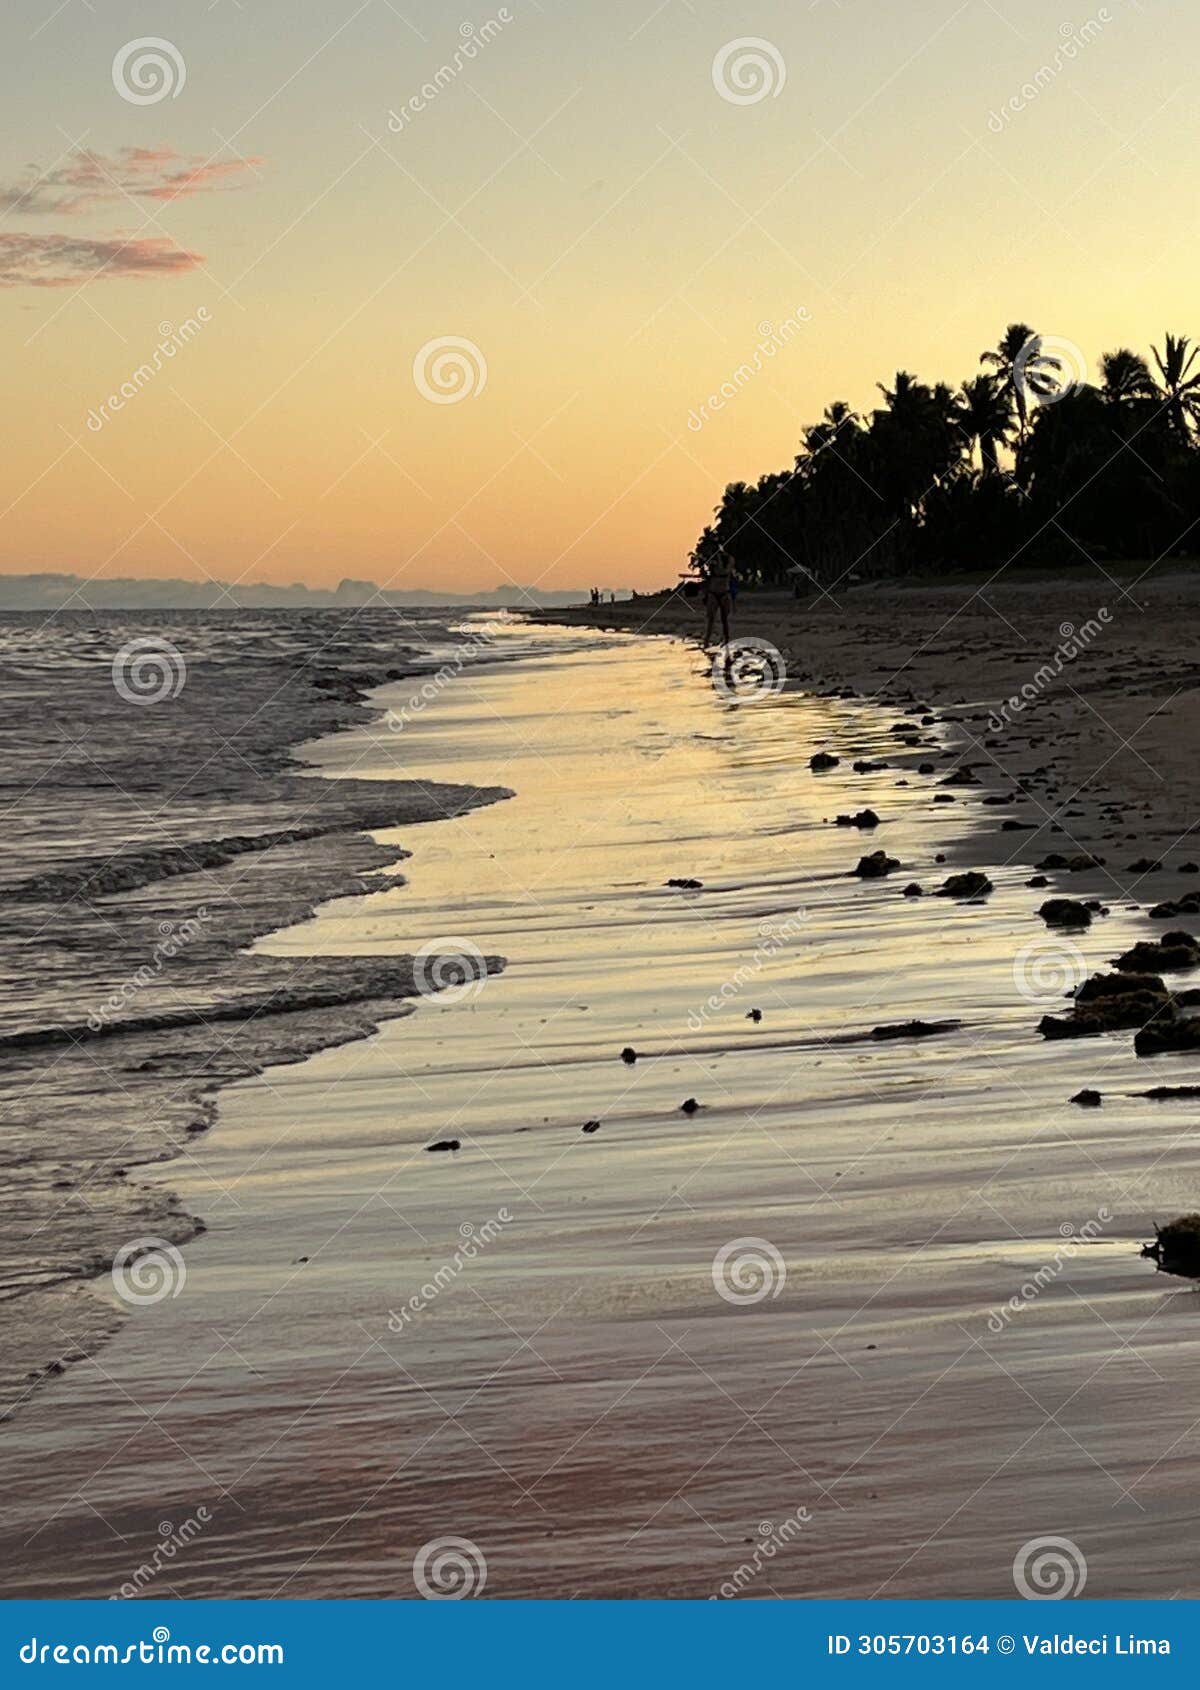 beach on sunset with light reflections on water